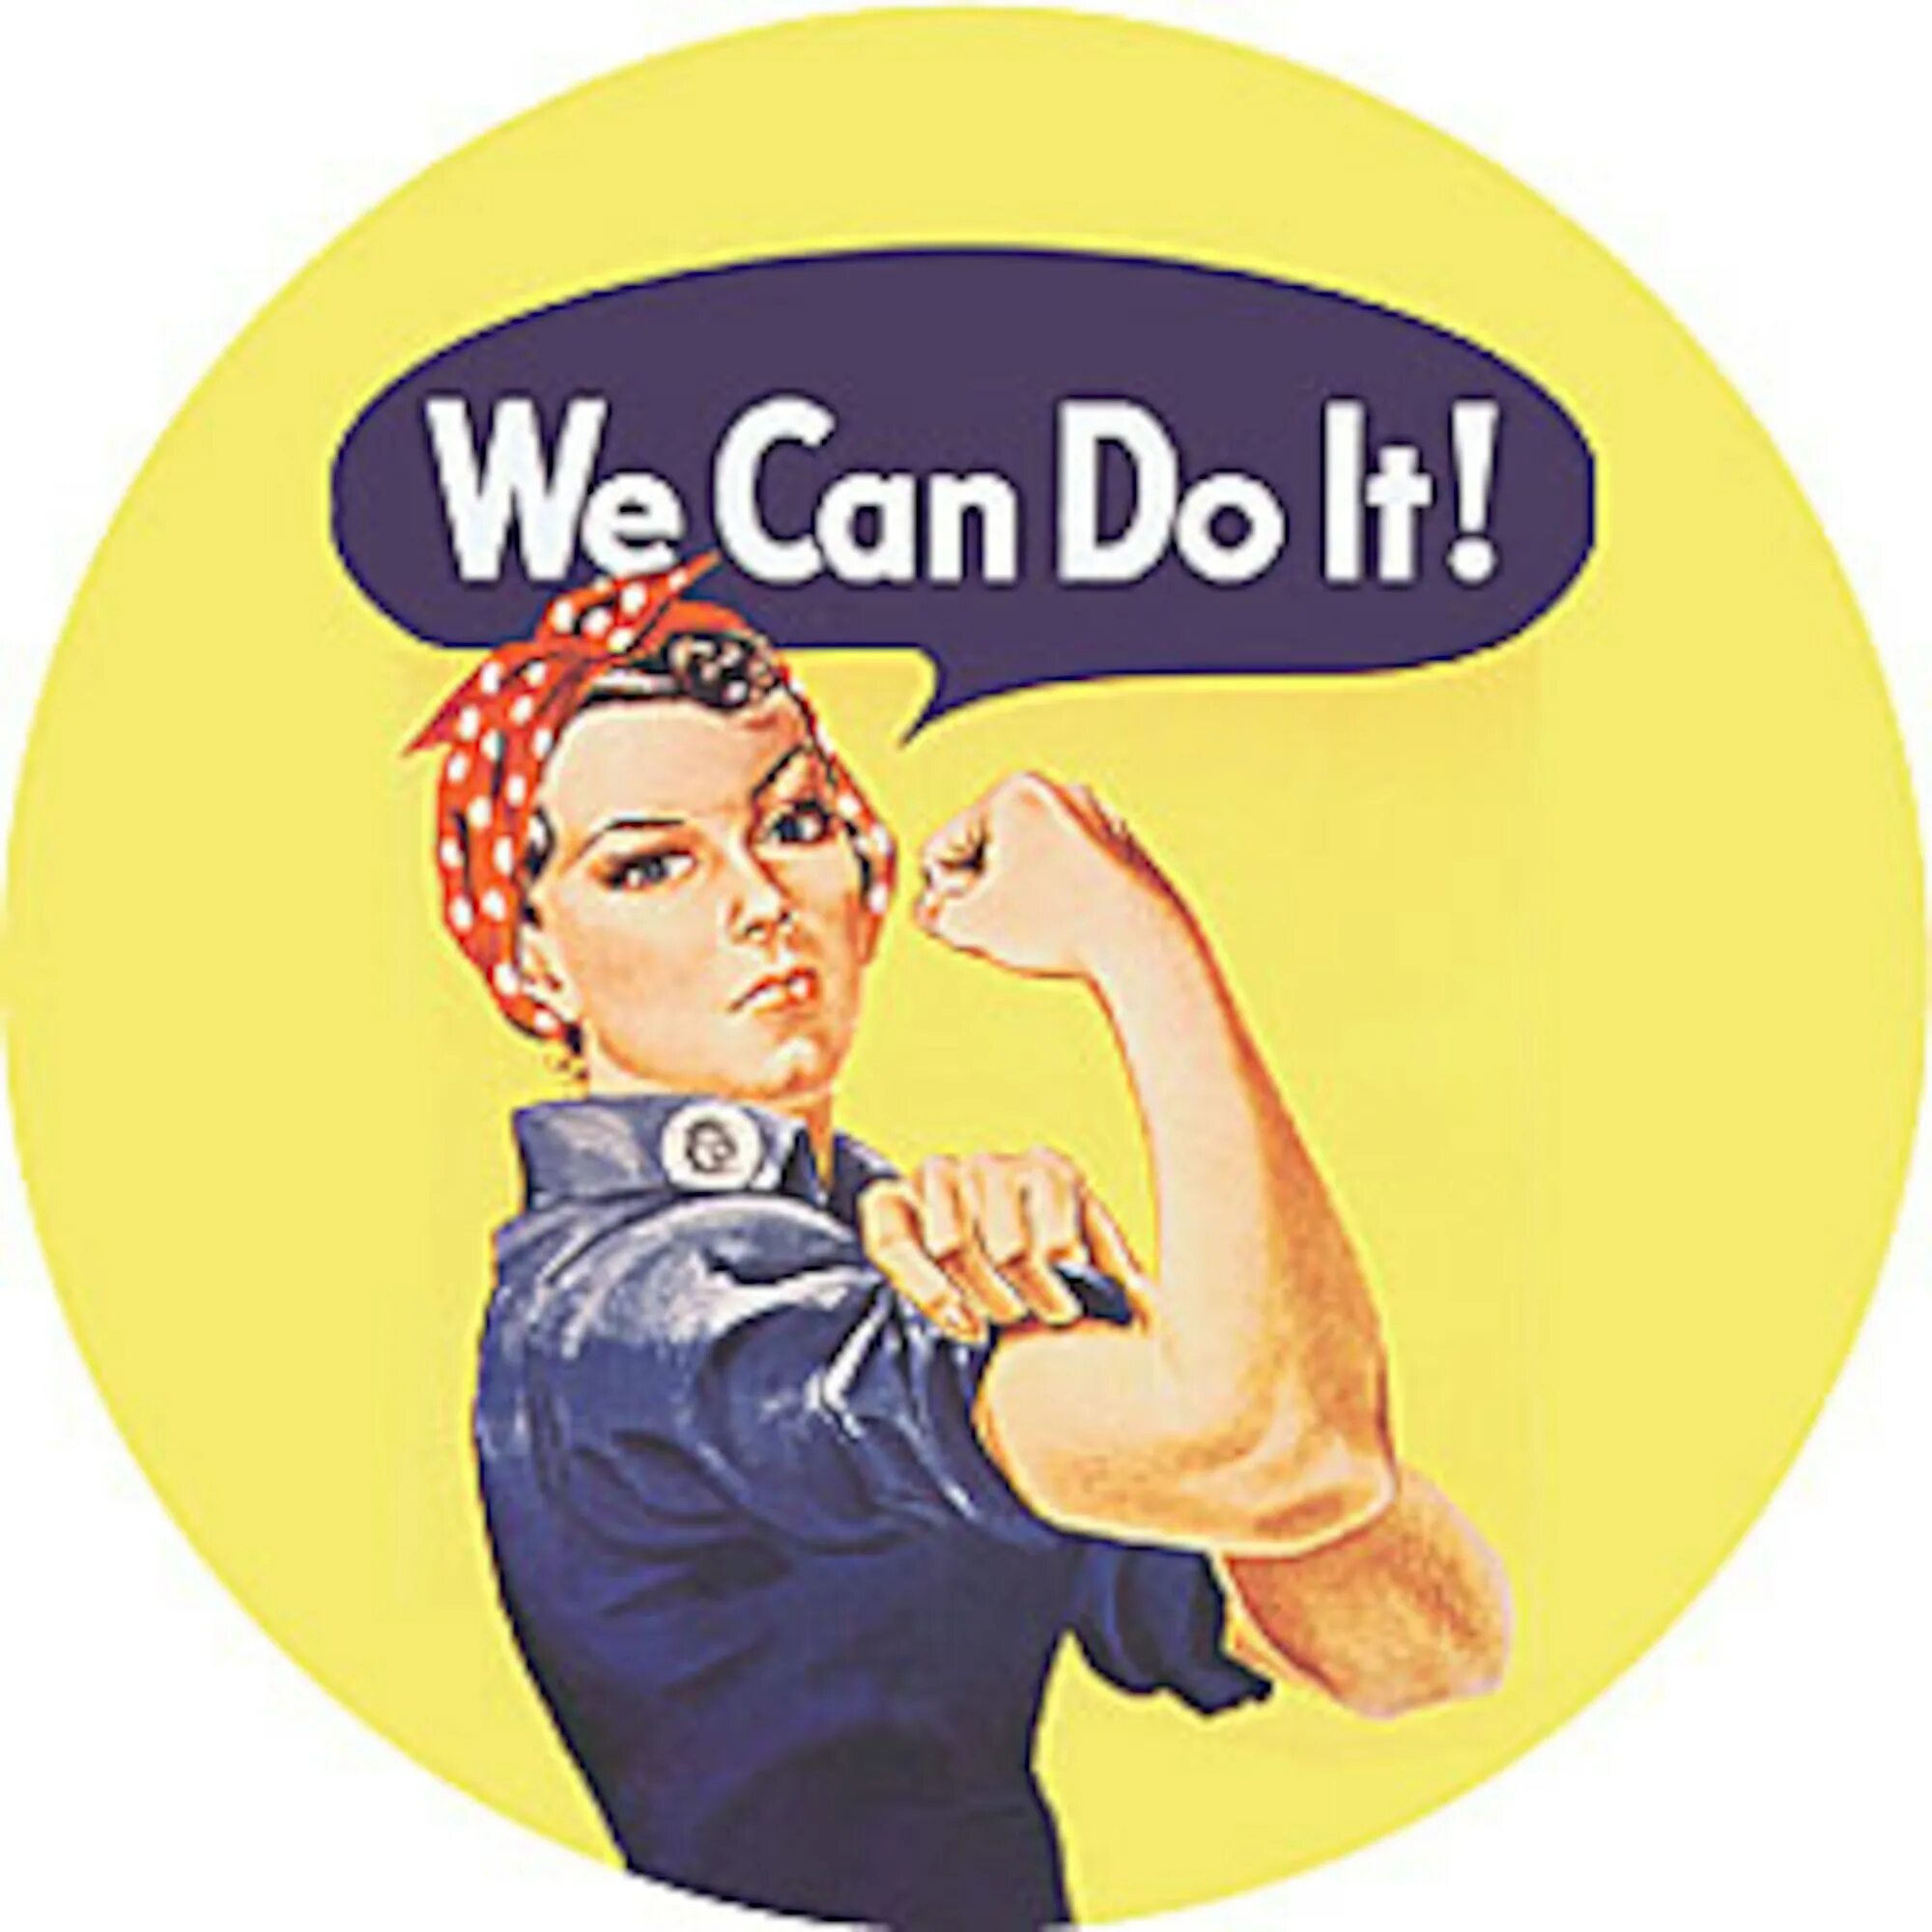 We can do a lot. Плакат «we can do it! ». Плакаты в стиле we can do it. Женщина we can do it. Плакат феминистка we can do it.